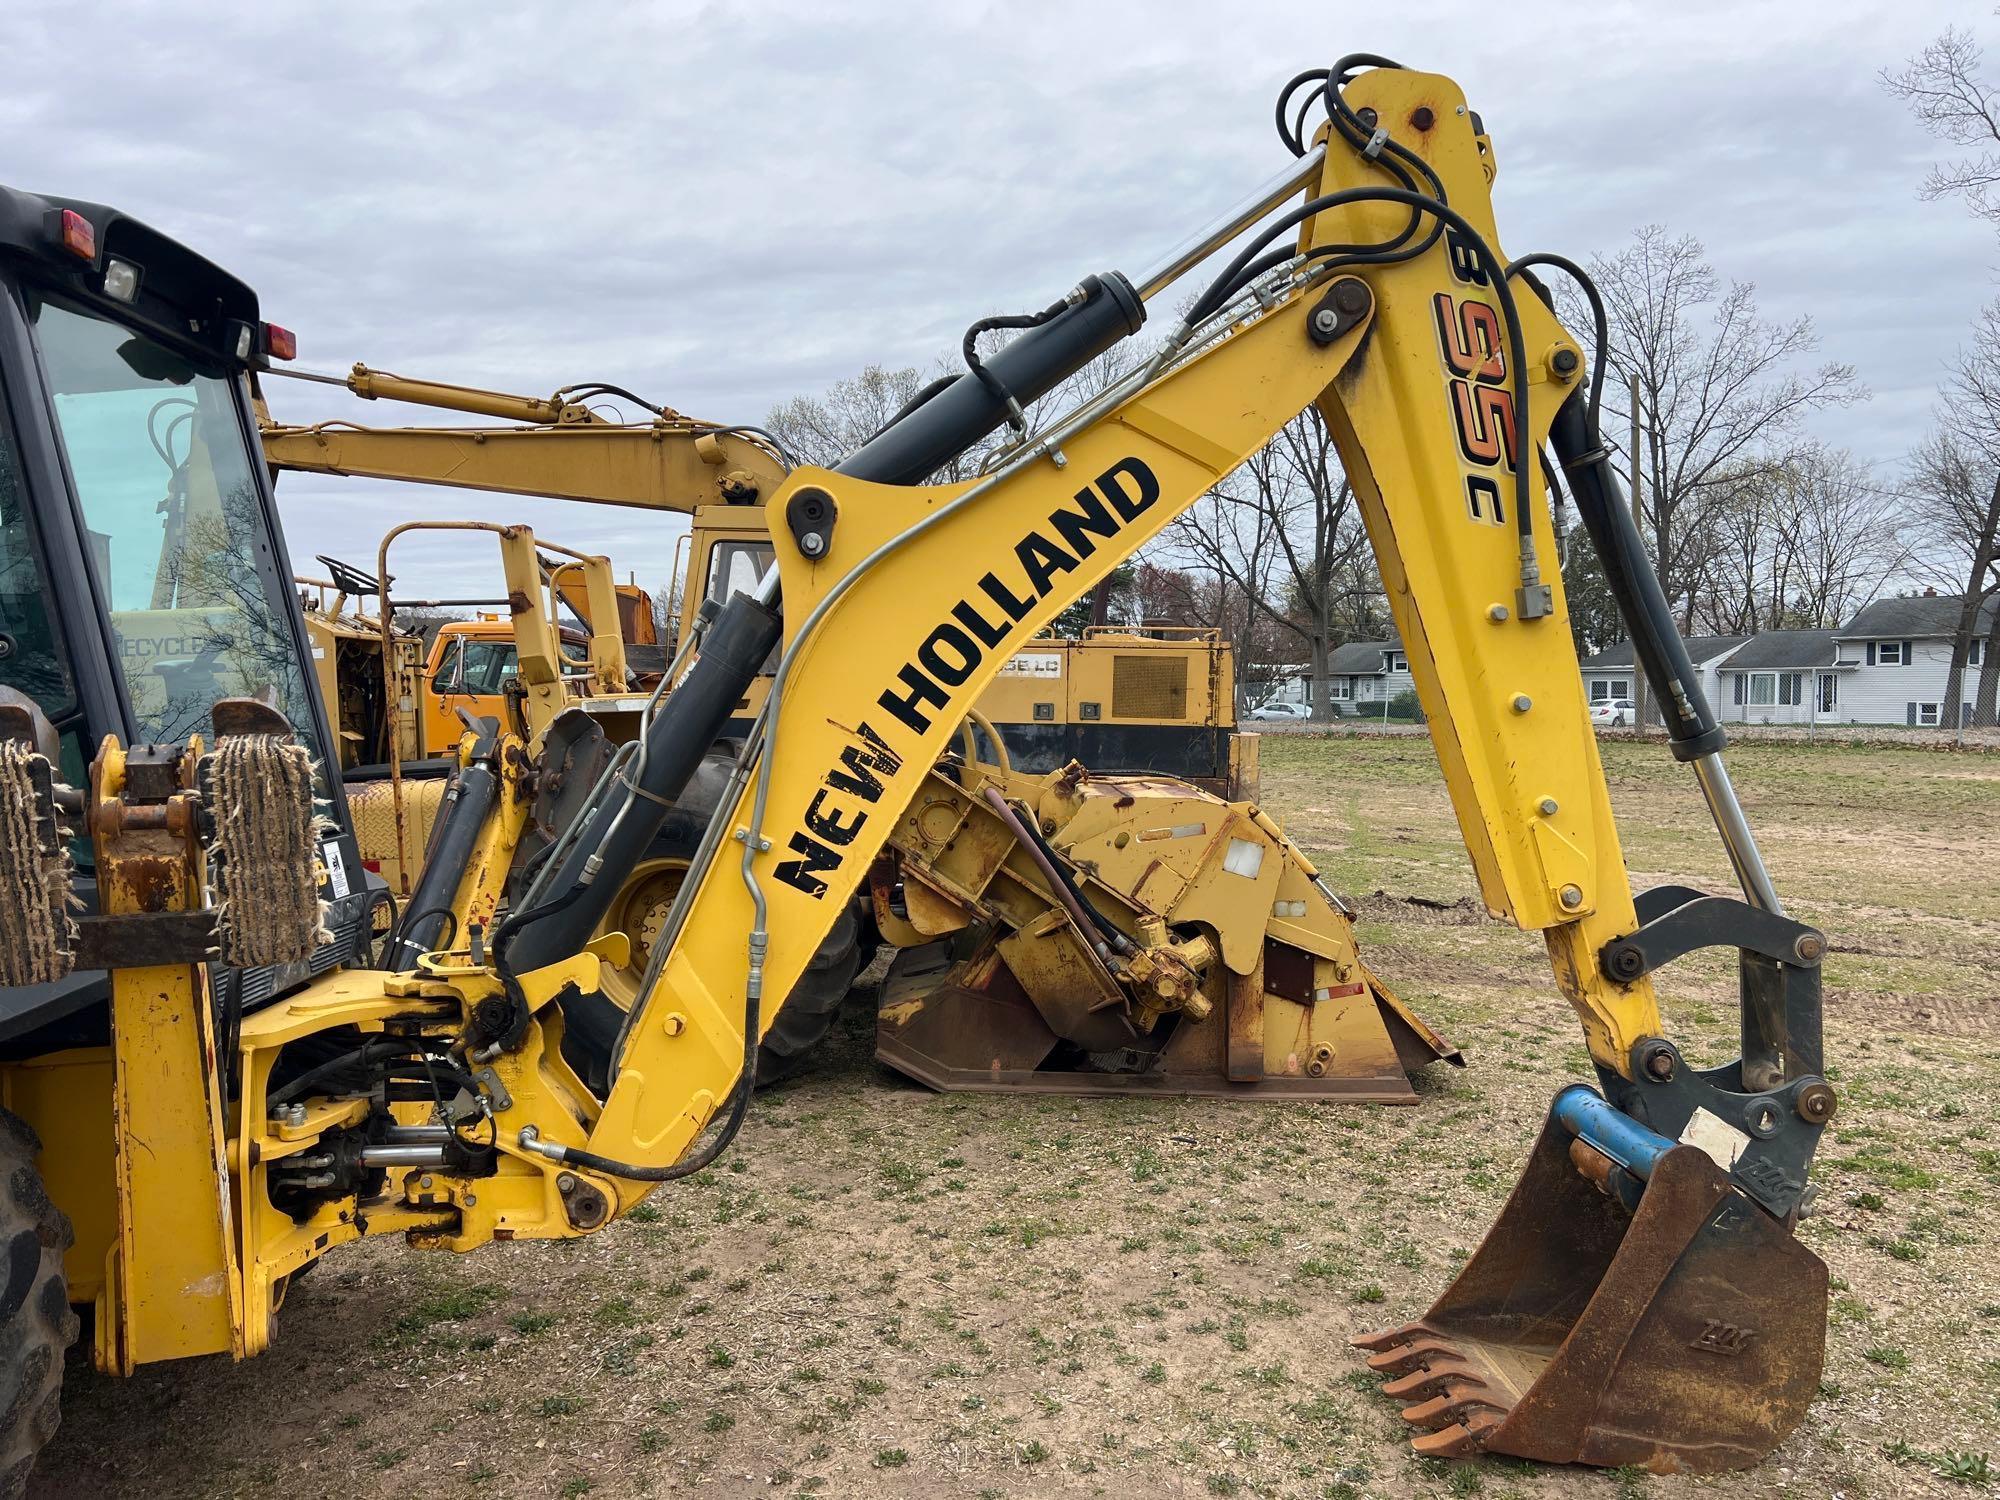 2018 NEW HOLLAND B95C TRACTOR LOADER BACKHOE SN:NJHH01798 4x4, powered by diesel engine, equipped